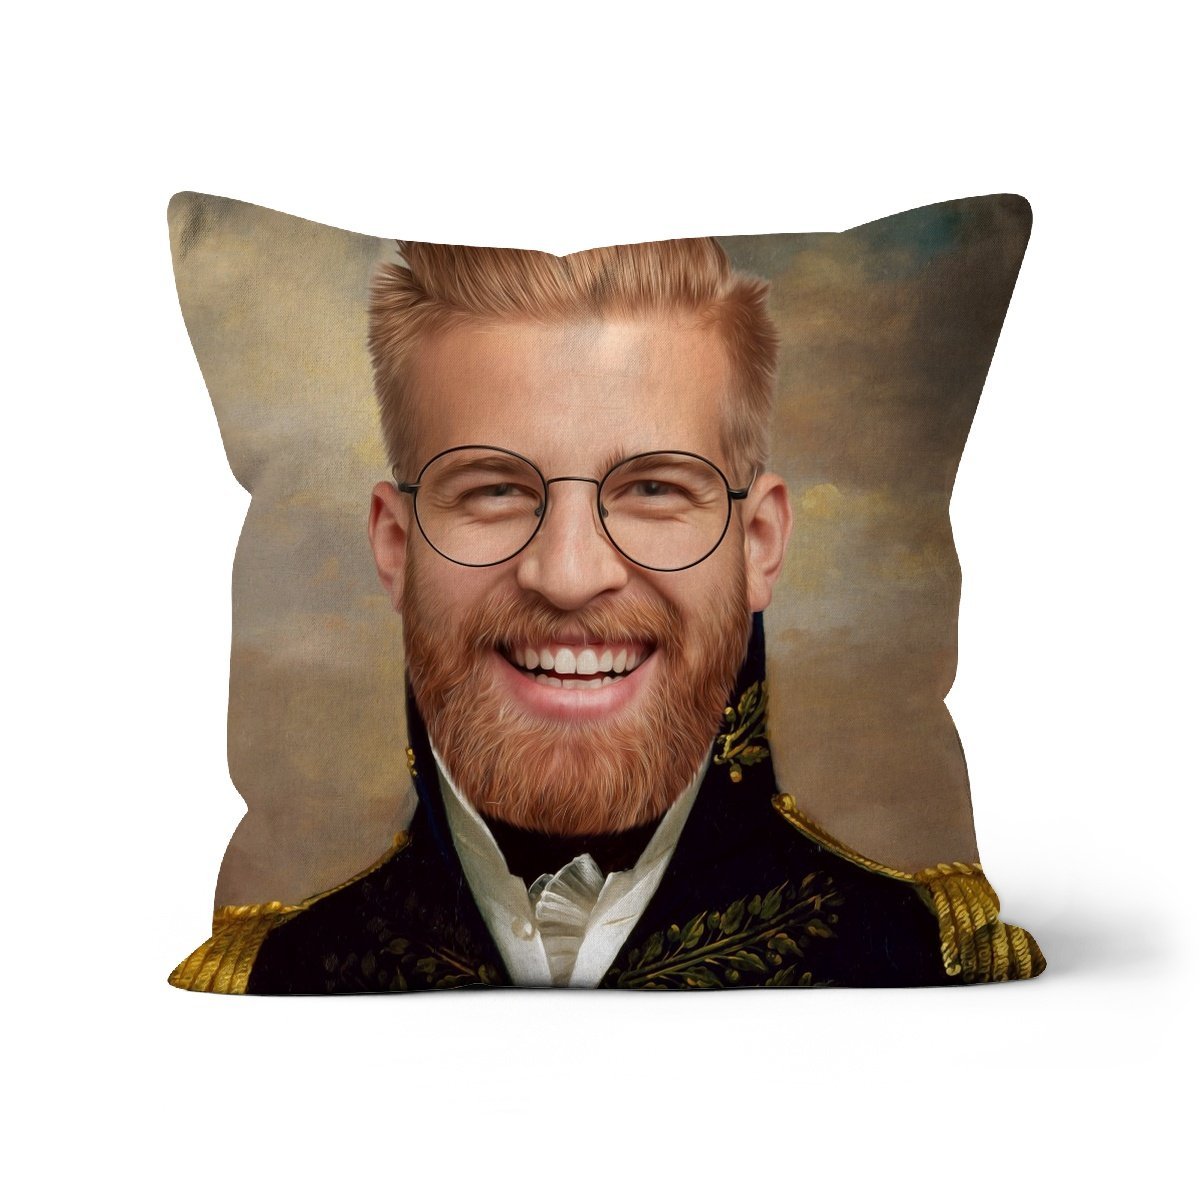 The General: Custom Male Throw Pillow - Paw & Glory - #pet portraits# - #dog portraits# - #pet portraits uk#paw and glory, pet portraits cushion,pillows of your dog, pillow with pet picture, print pet on pillow, pet face pillow, pup pillows